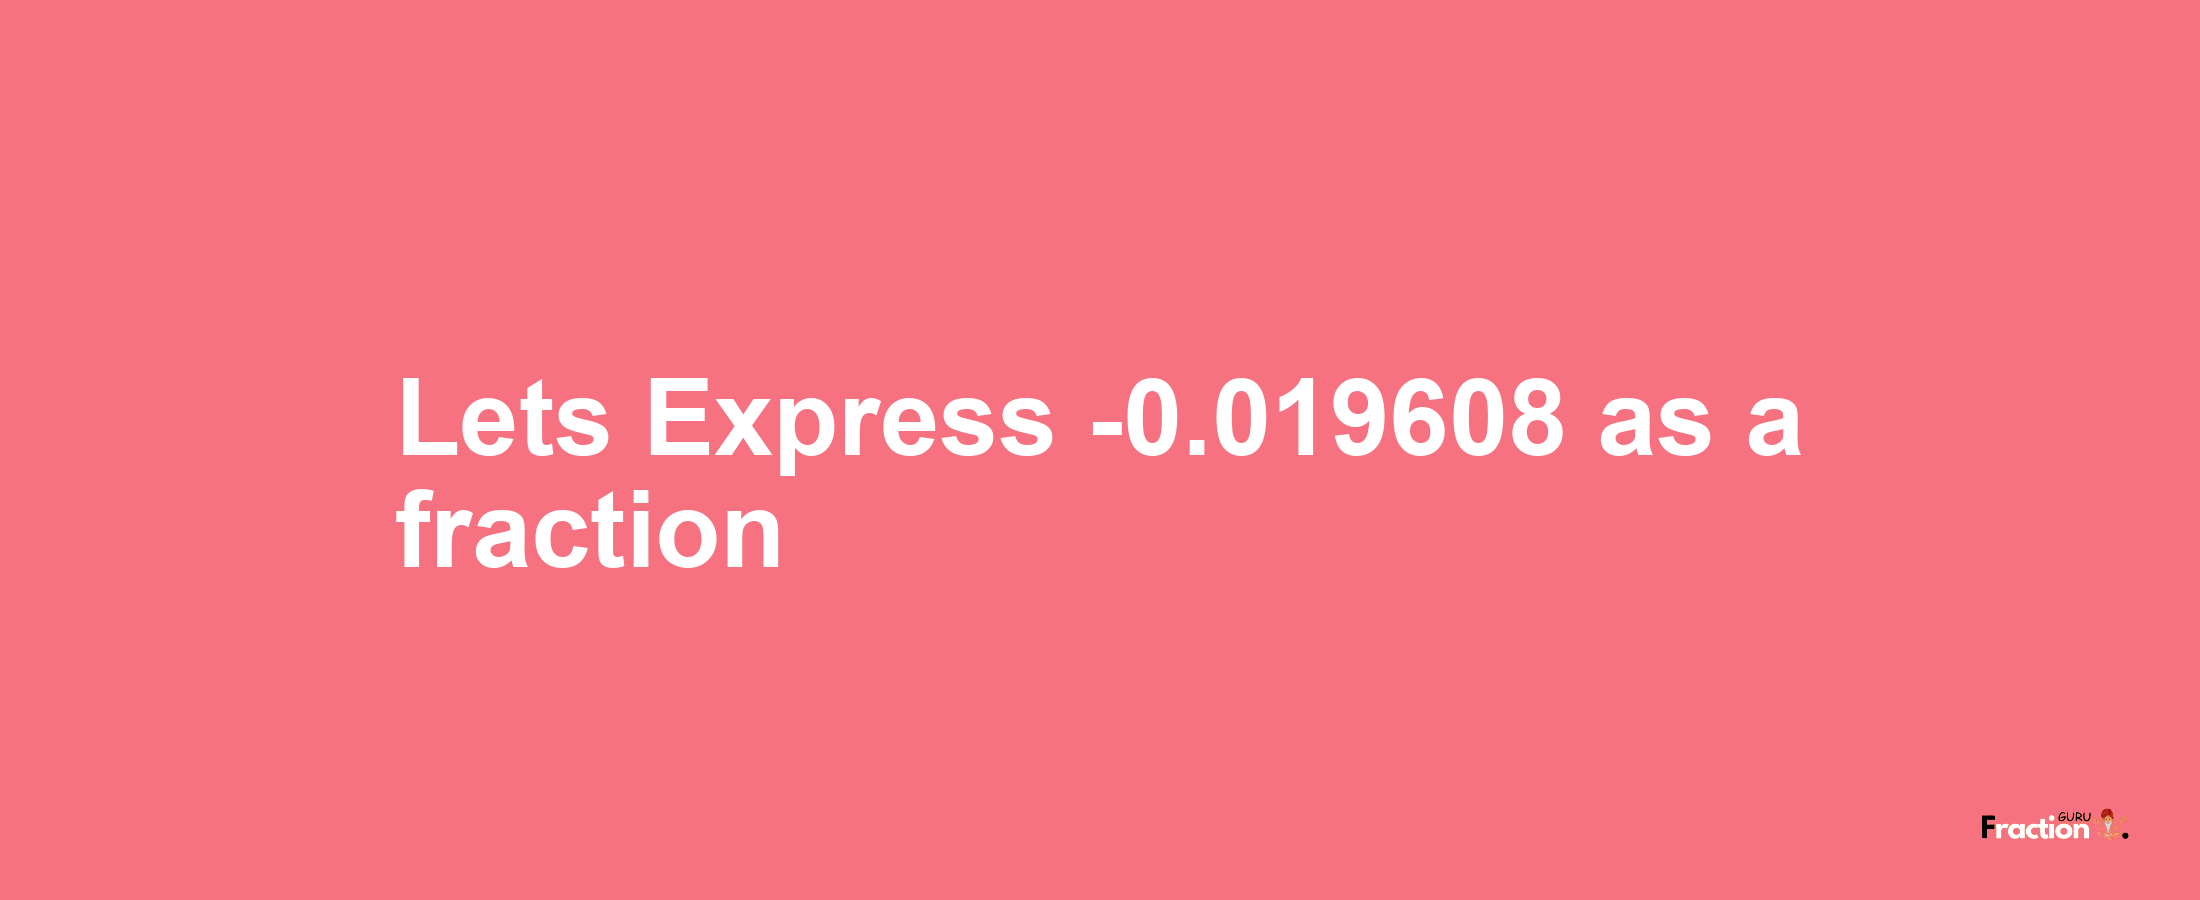 Lets Express -0.019608 as afraction